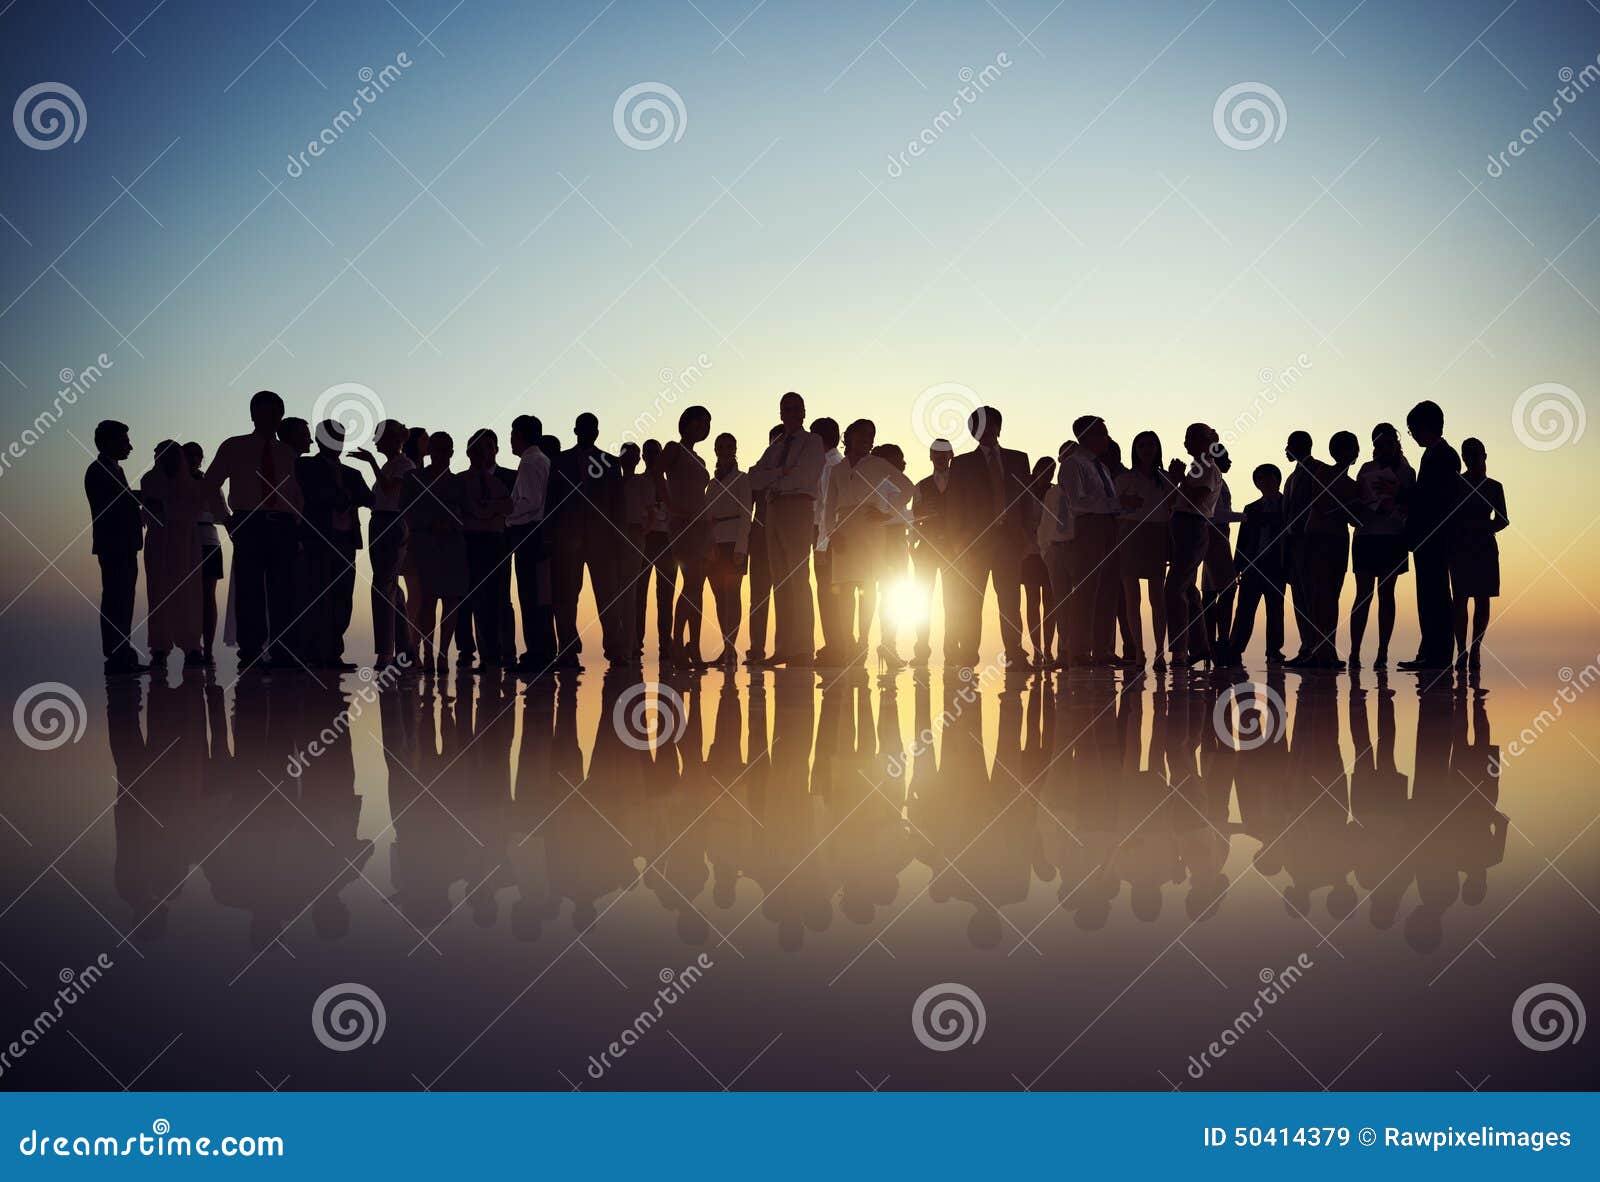 silhouettes of business people gathering outdoors